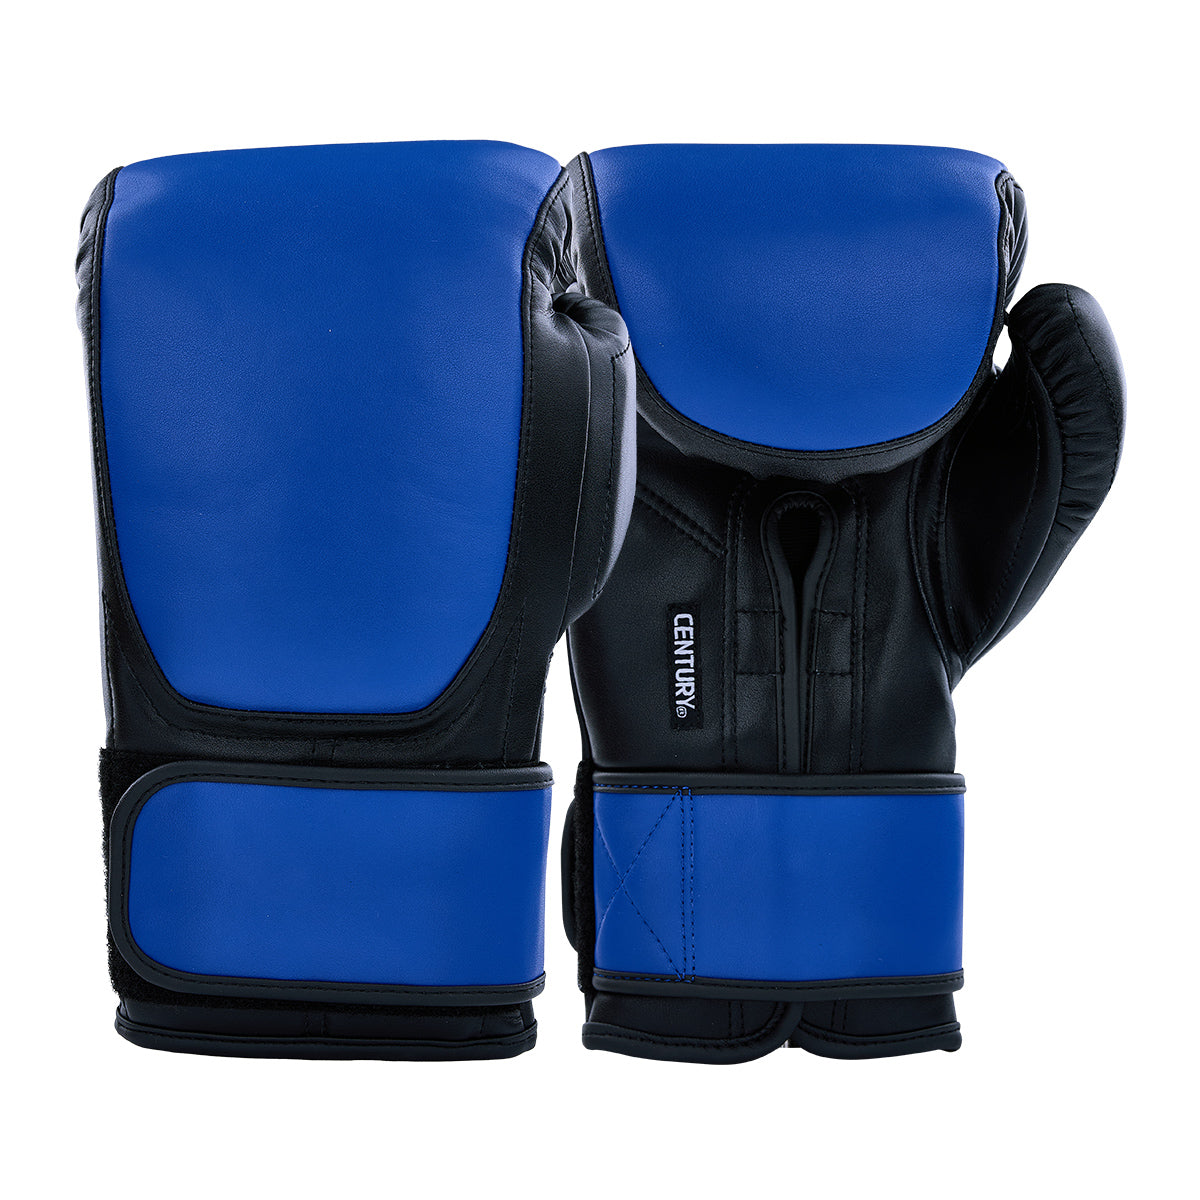 Custom Leather Bag Glove With Wrist Support Blue